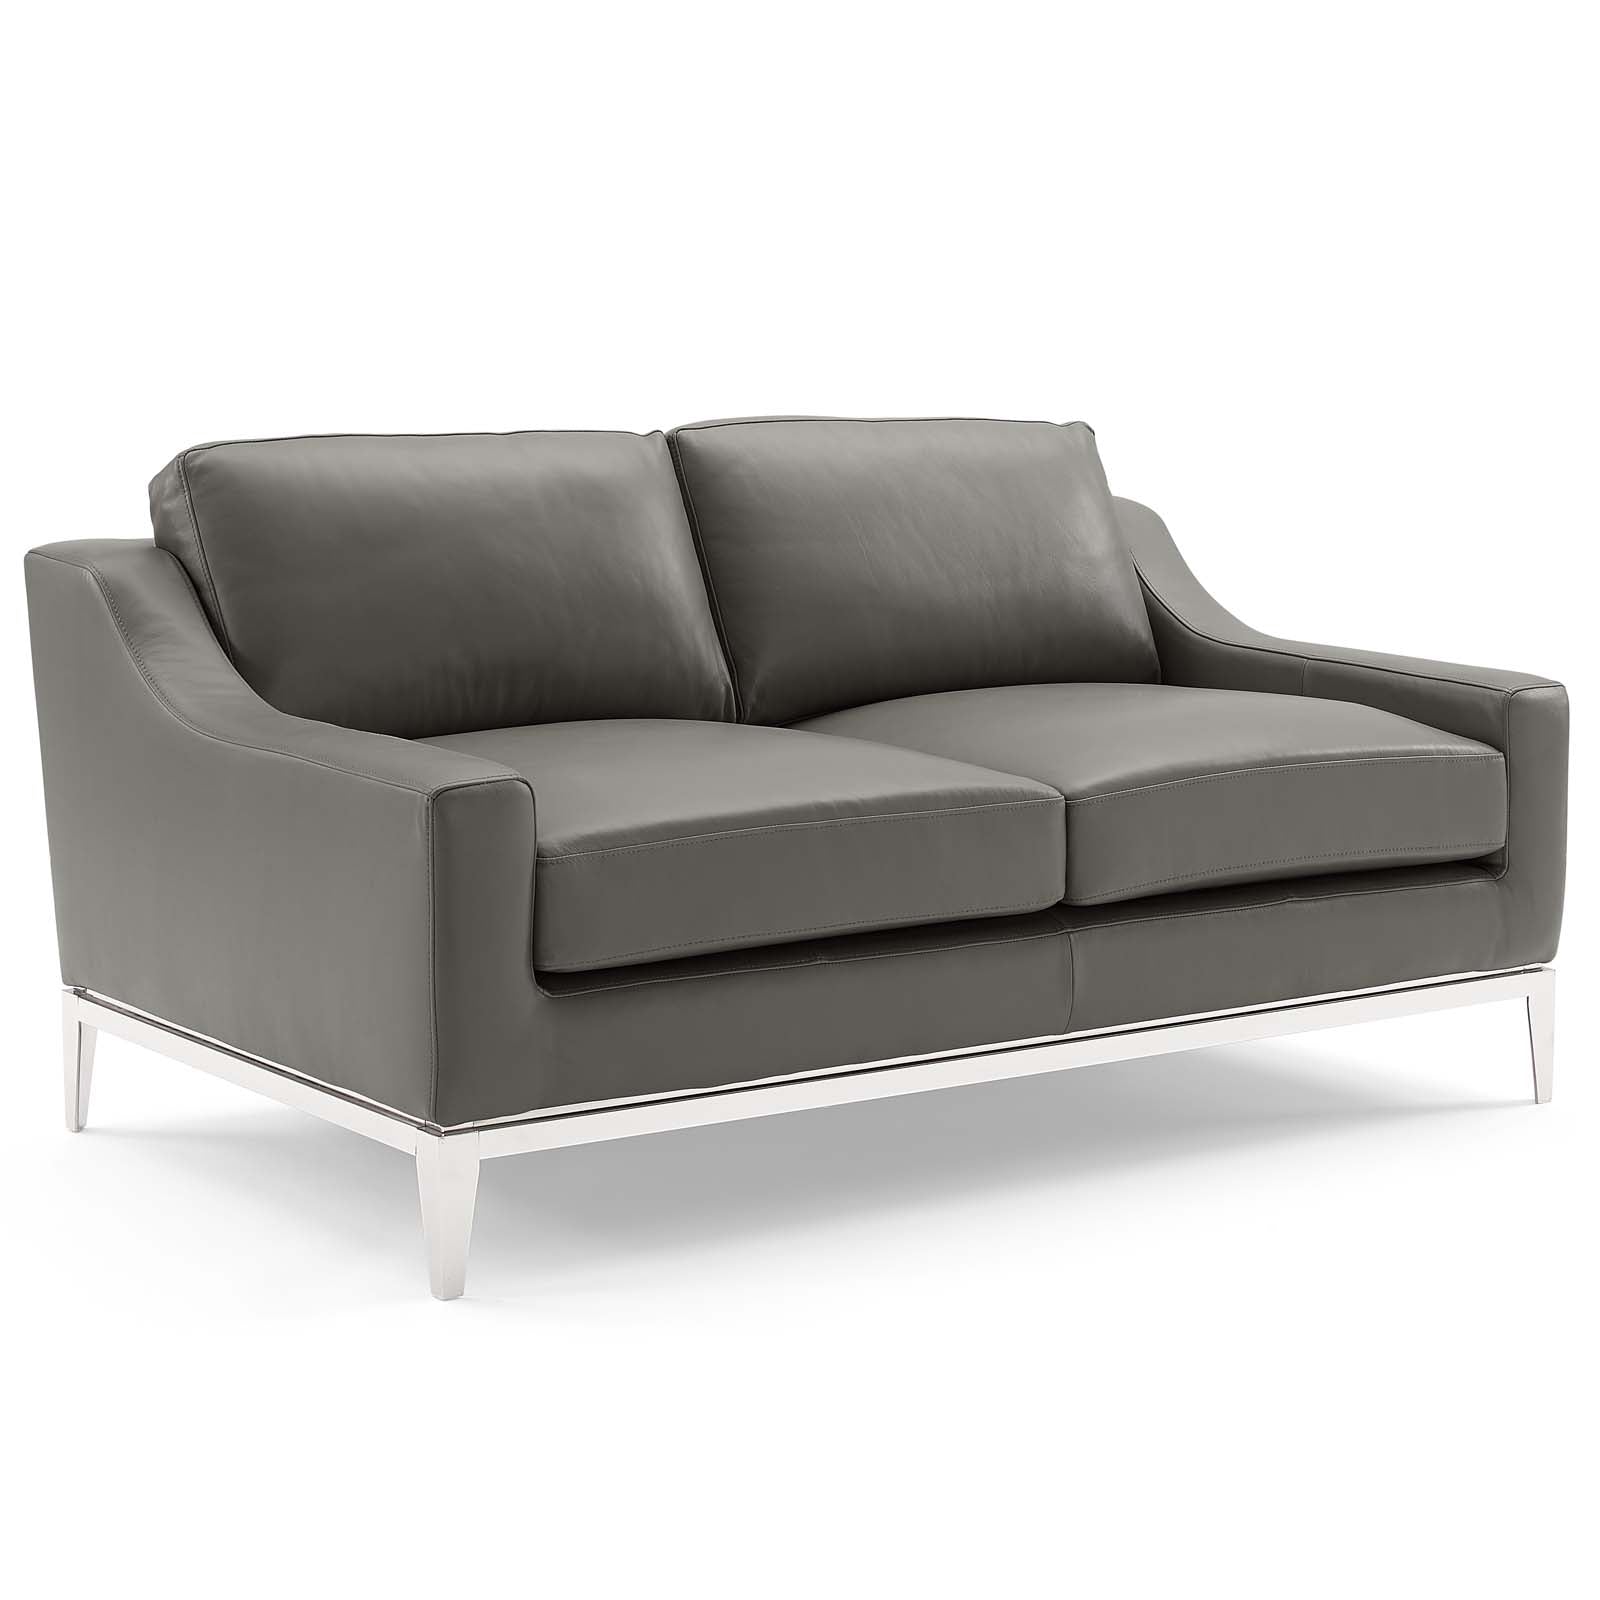 Modway Sofas & Couches - Harness-Stainless-Steel-Base-Leather-Sofa-and-Loveseat-Set-Gray